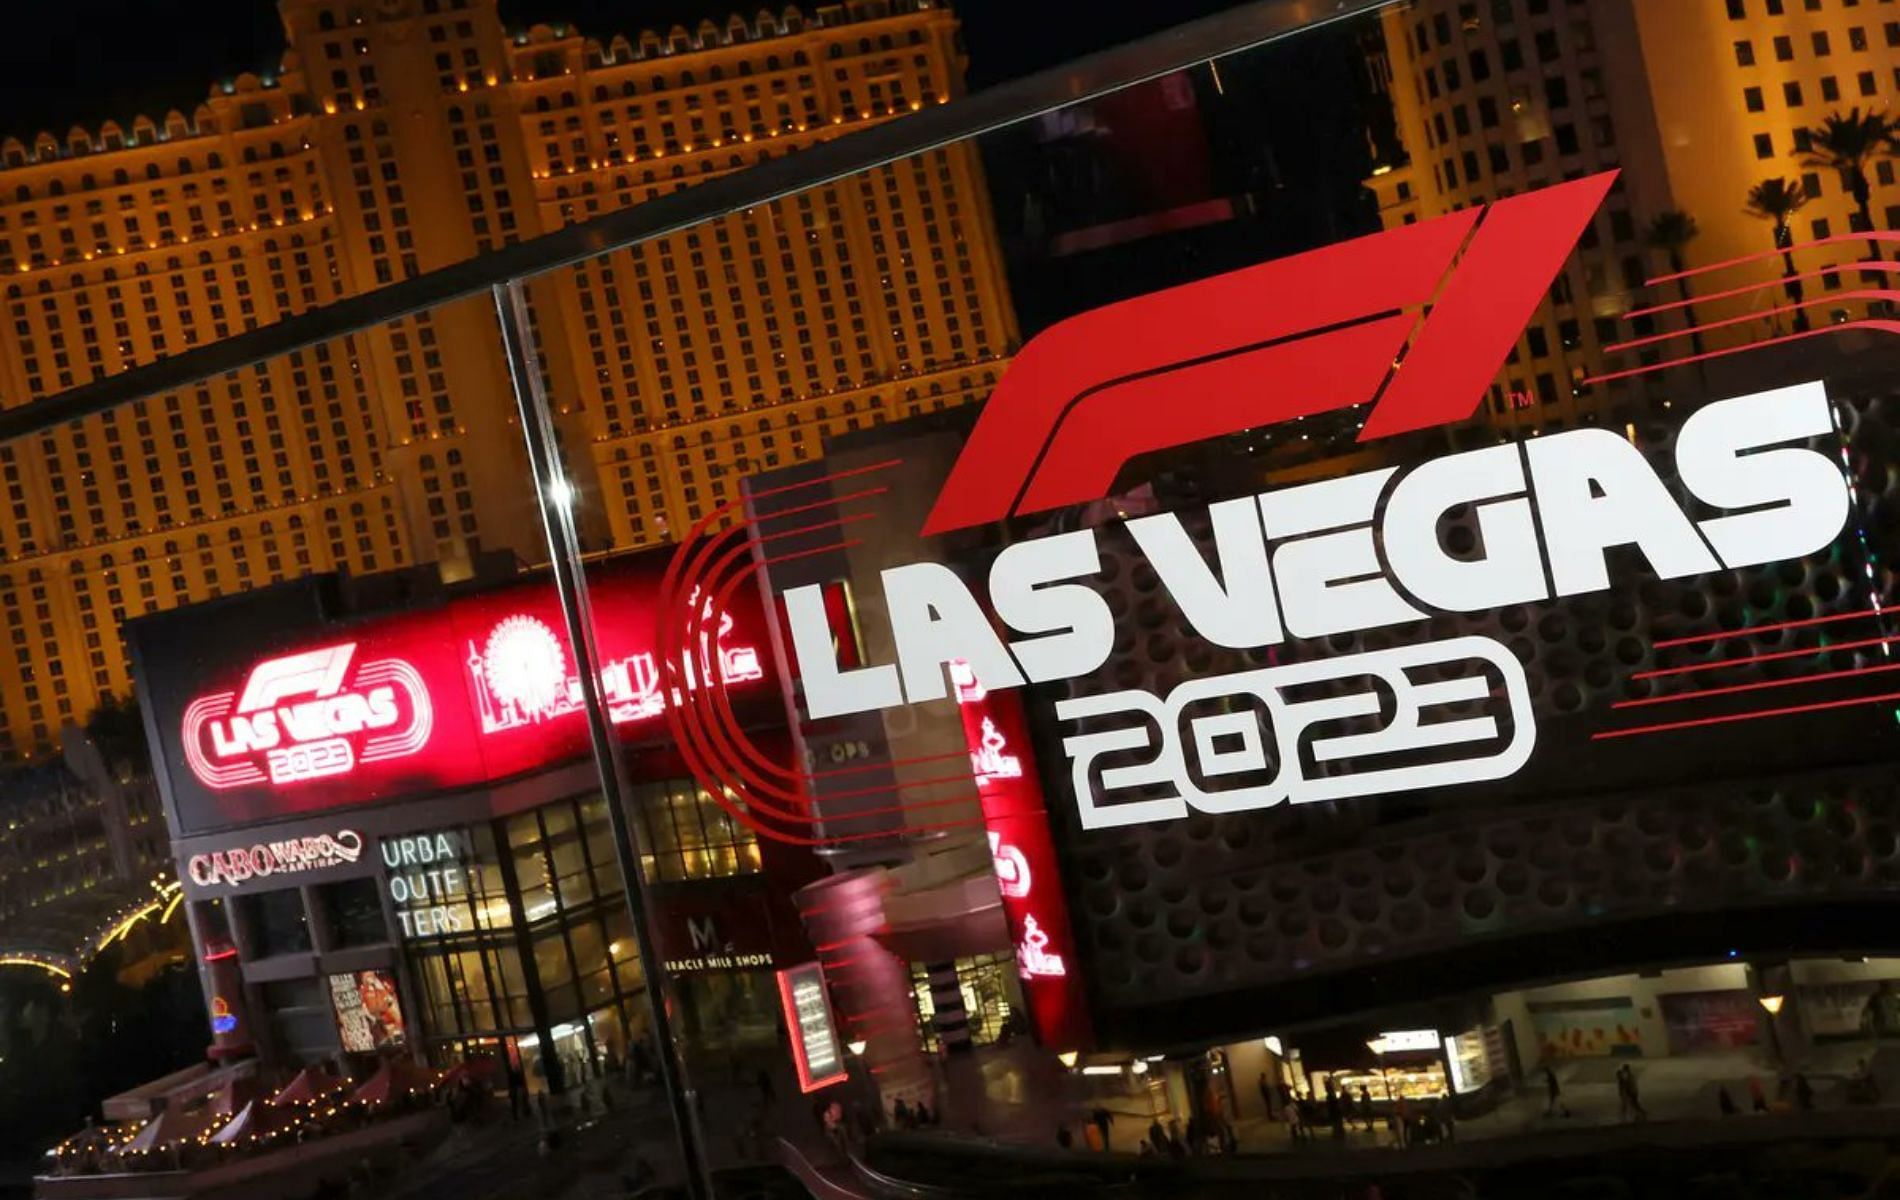 Race packages for 2023 F1 Las Vegas GP could cost fans up to 100,000